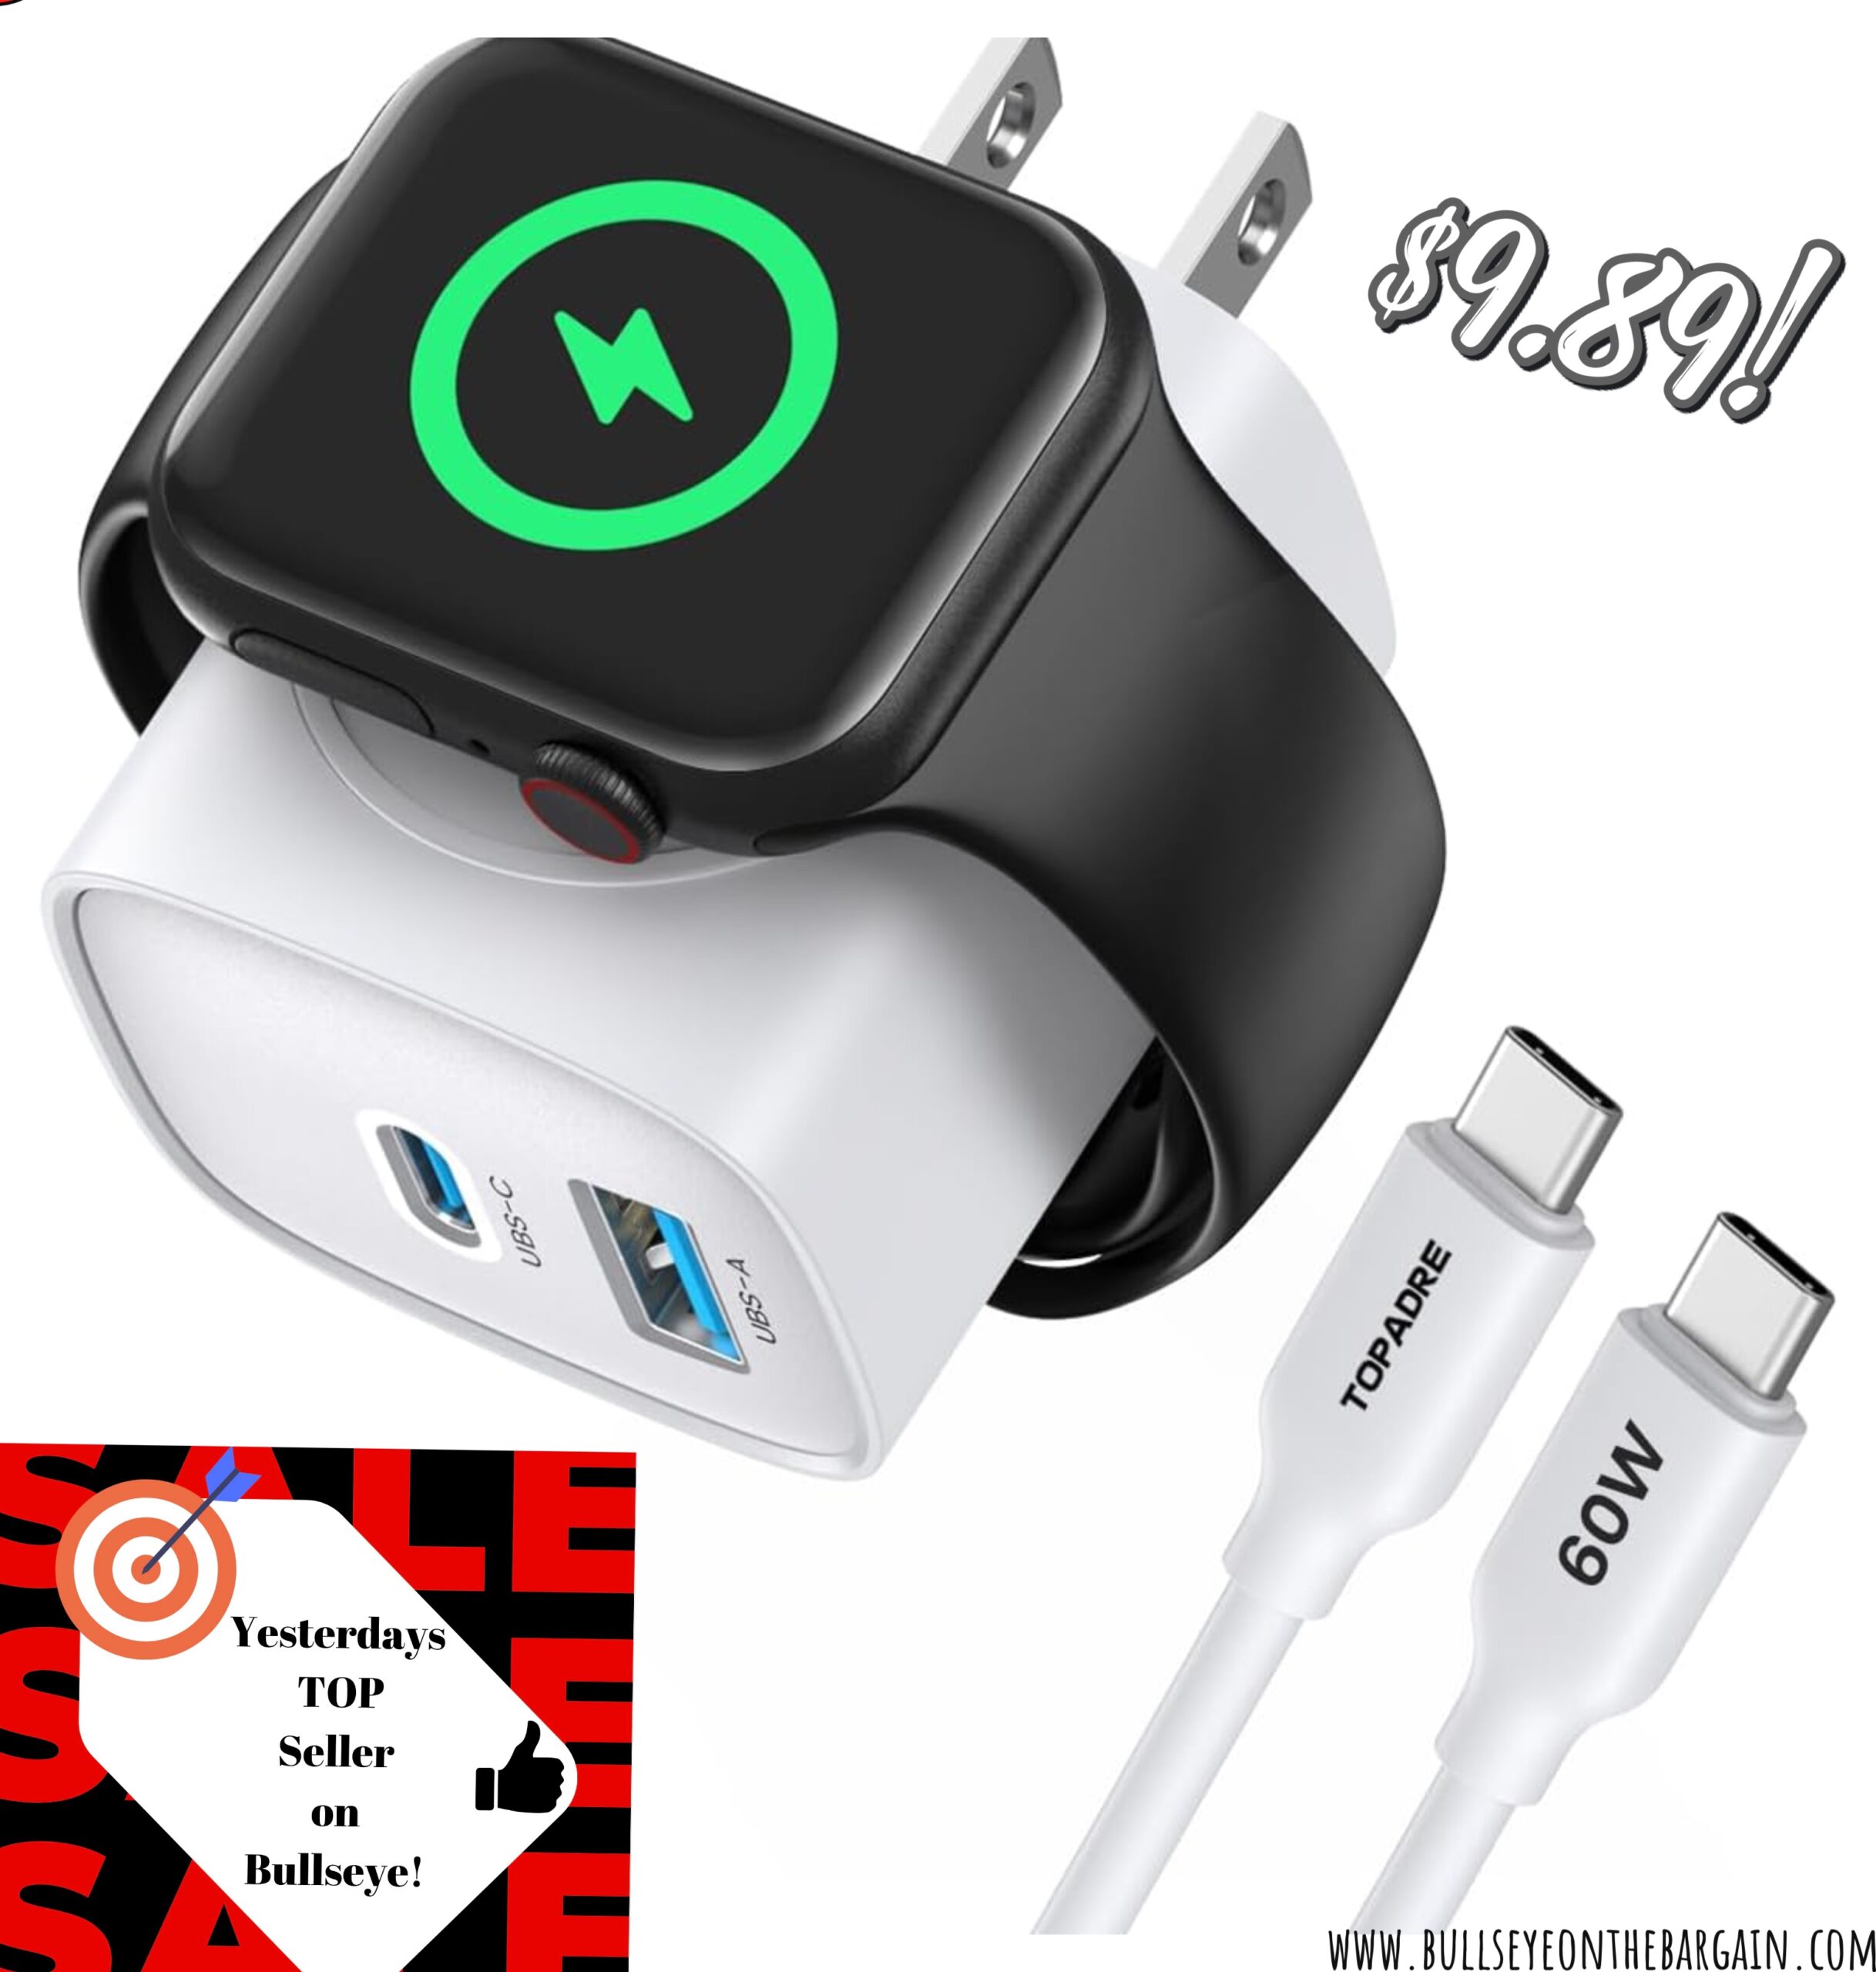 45% off Watch Chargers!